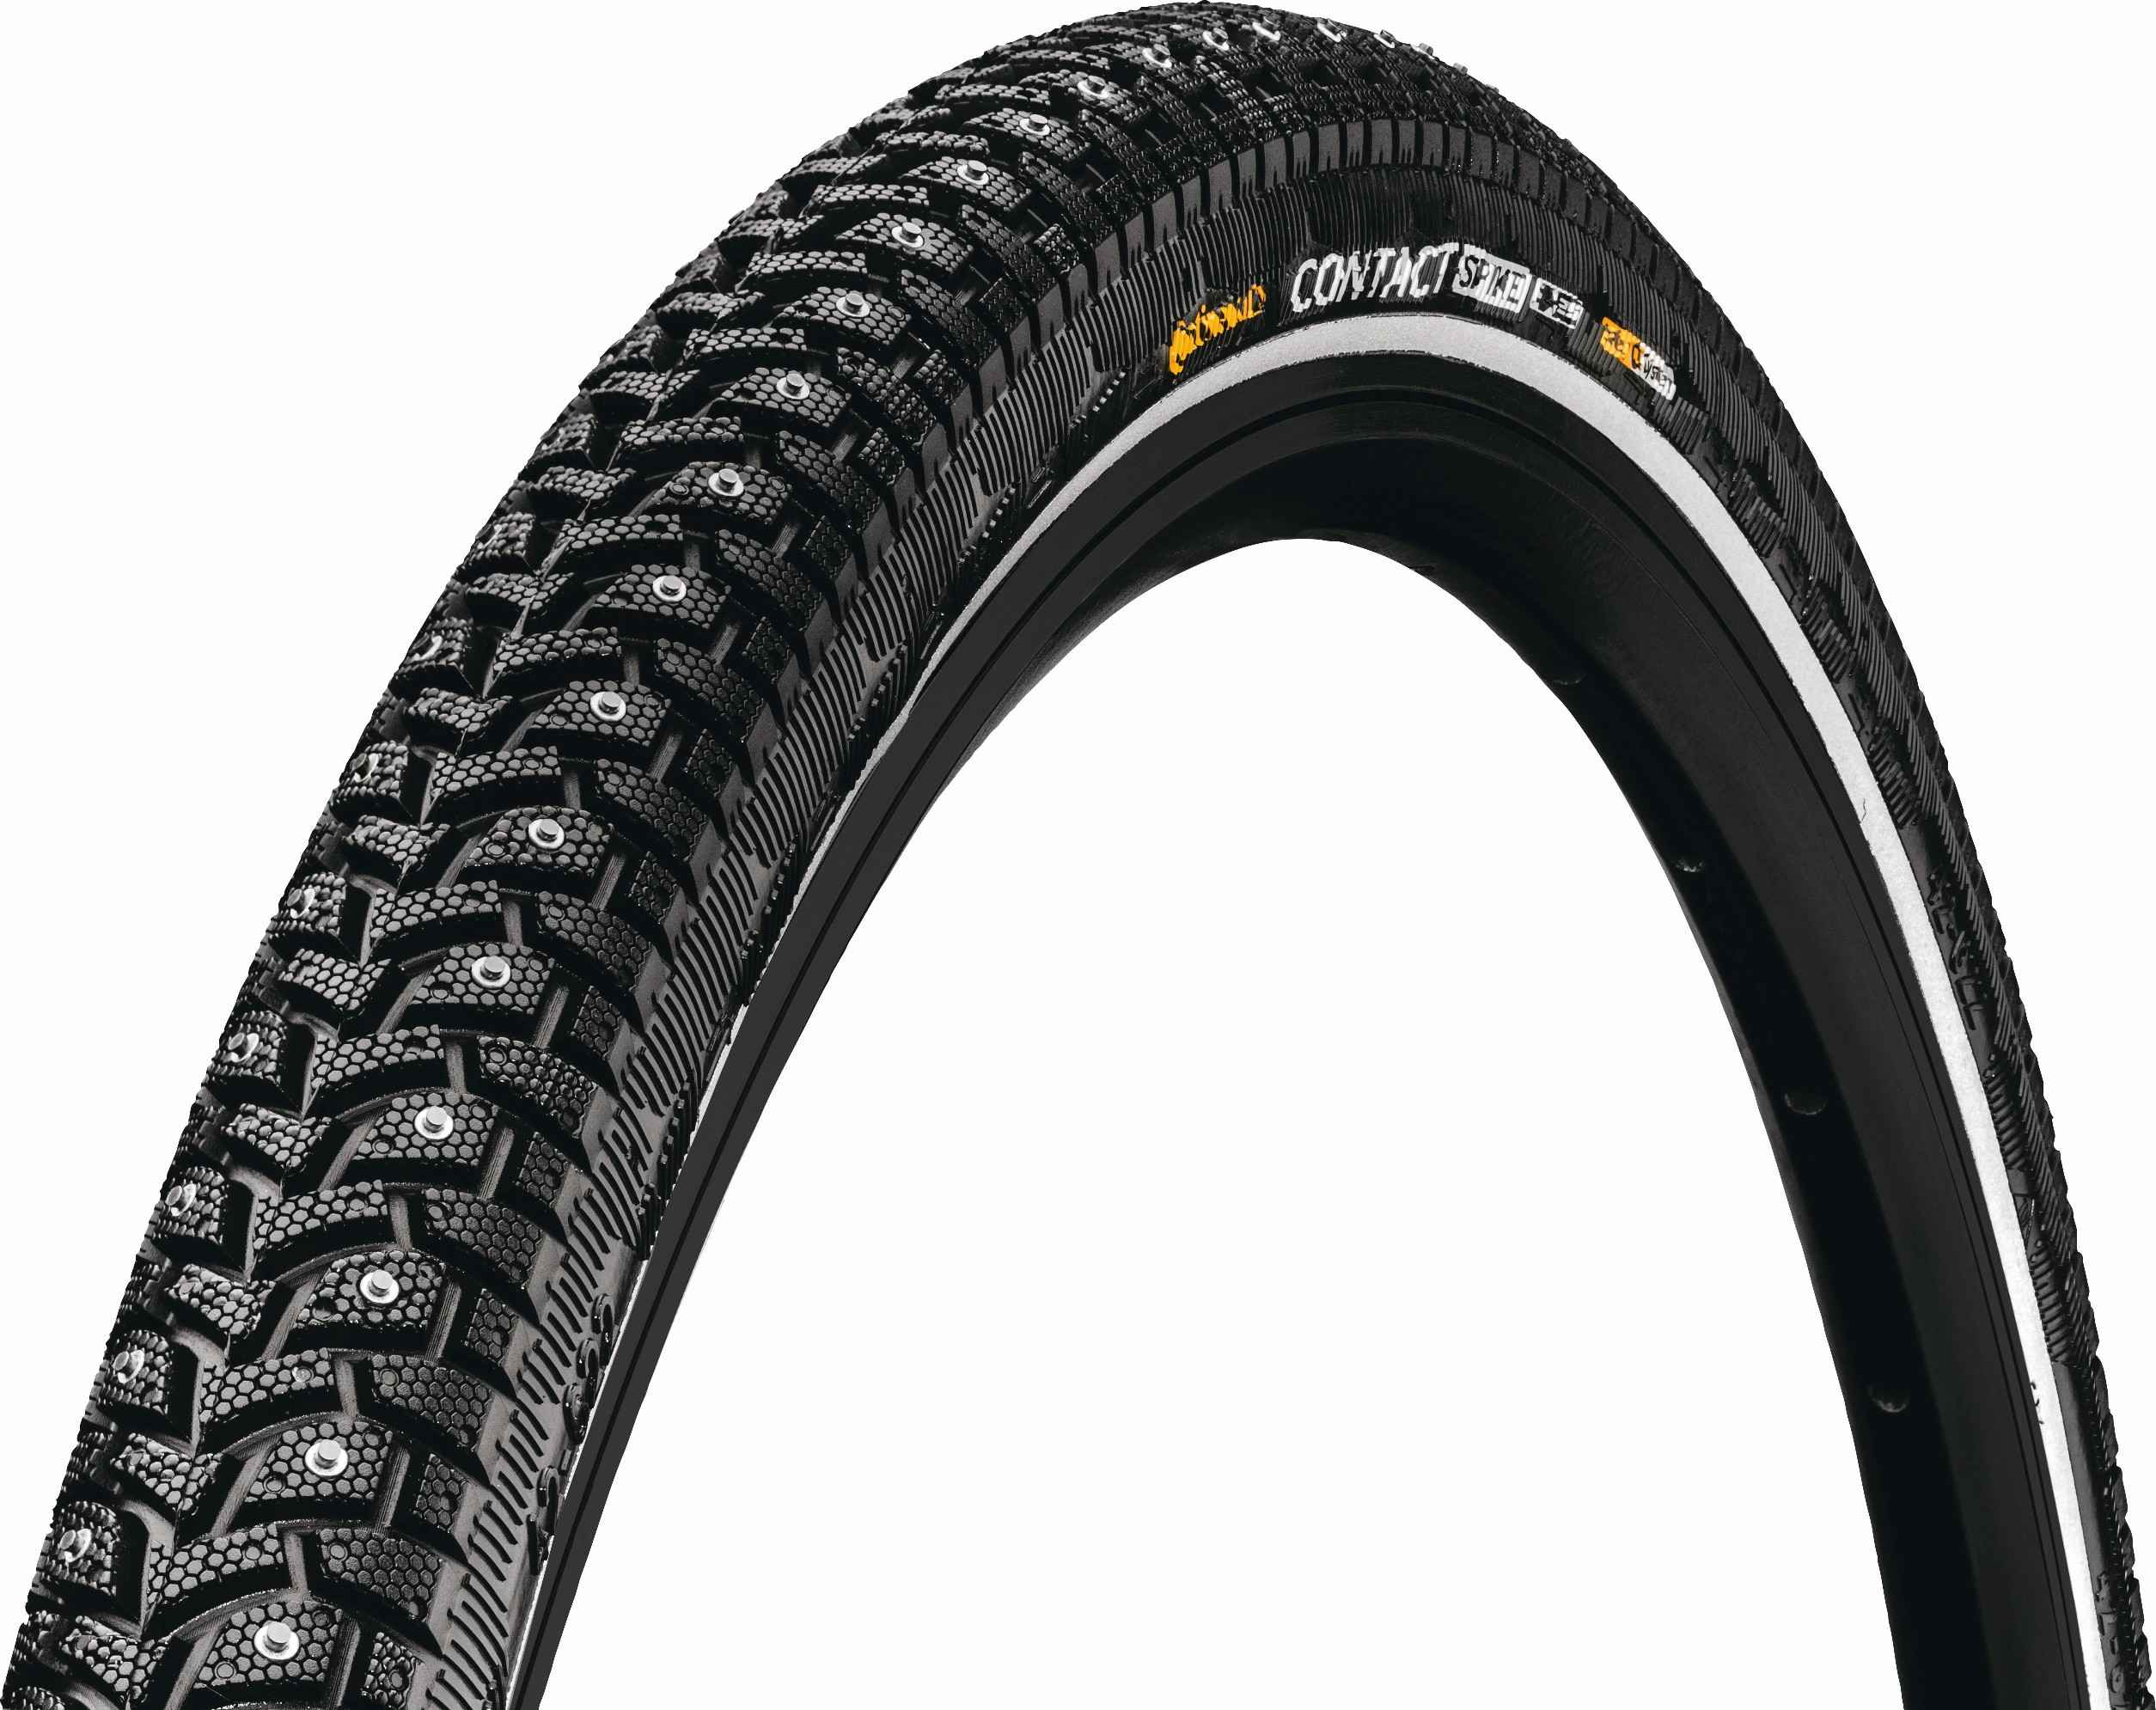 Continental CONTACT Spike 240 reflex wire-37-622 (700 x 35C)-image